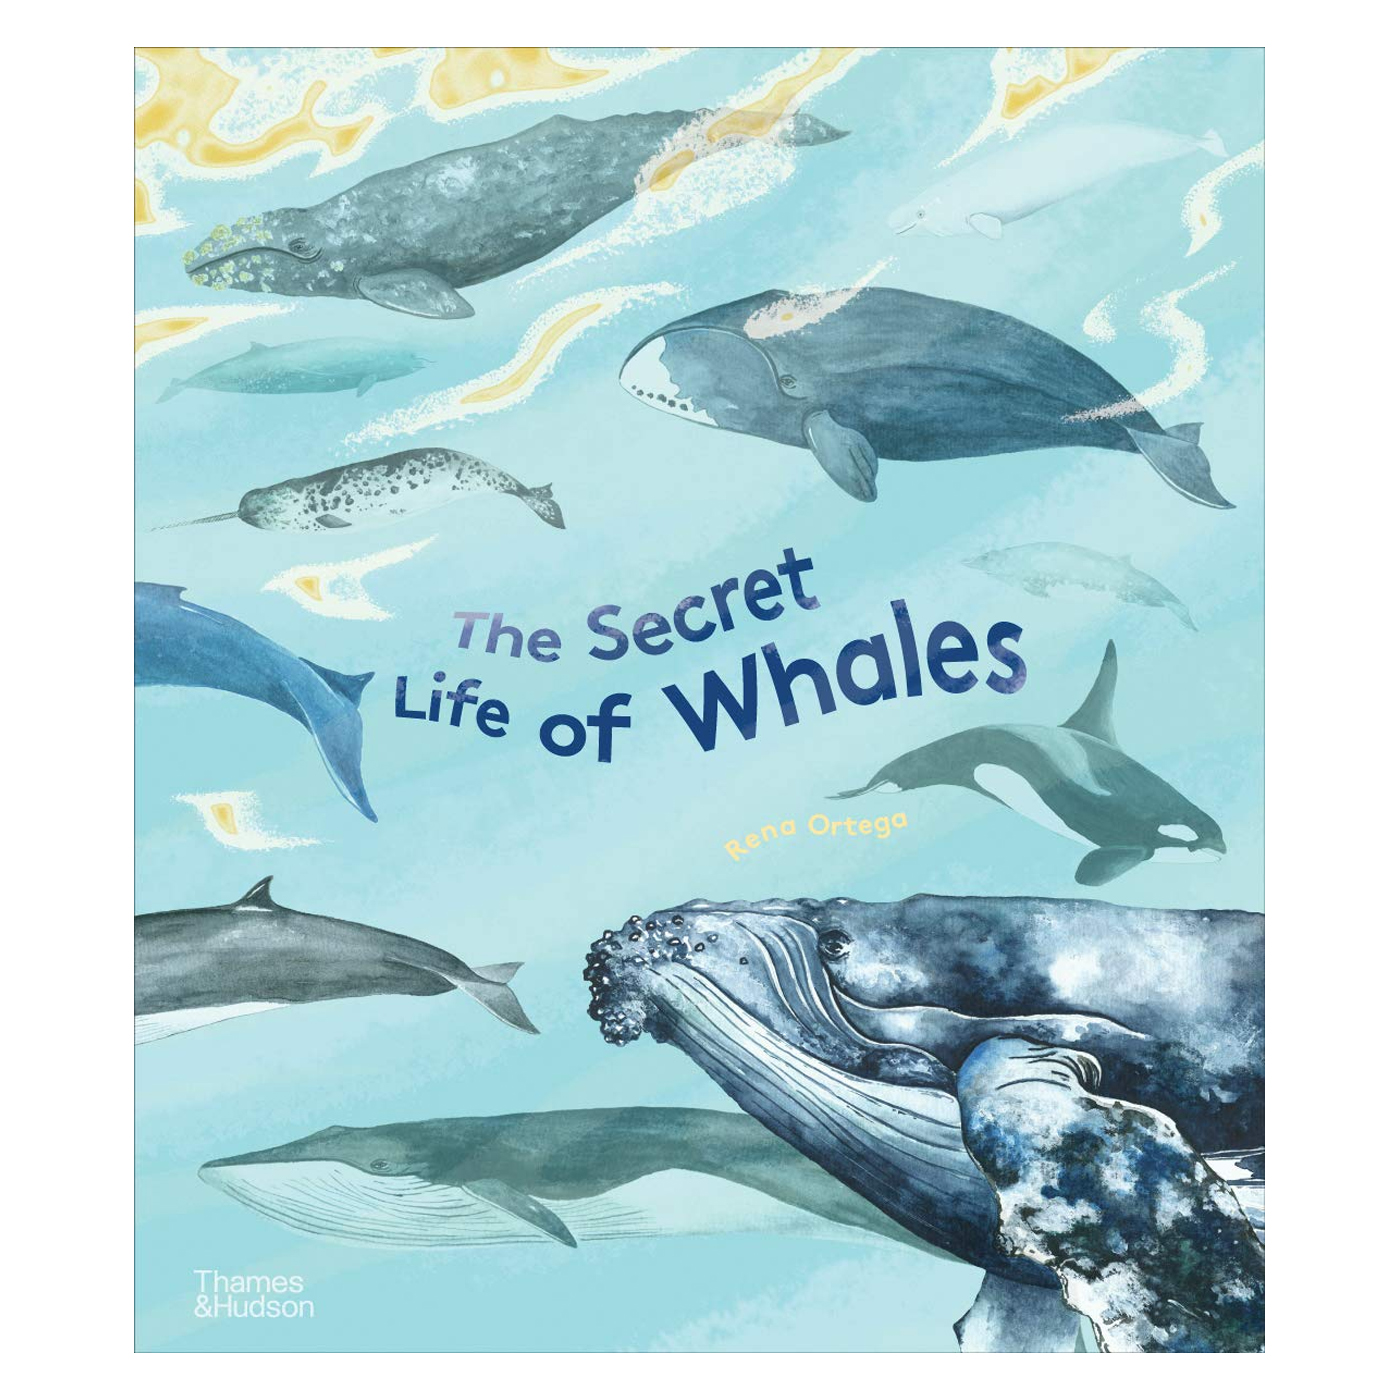  The Secret Life of Whales